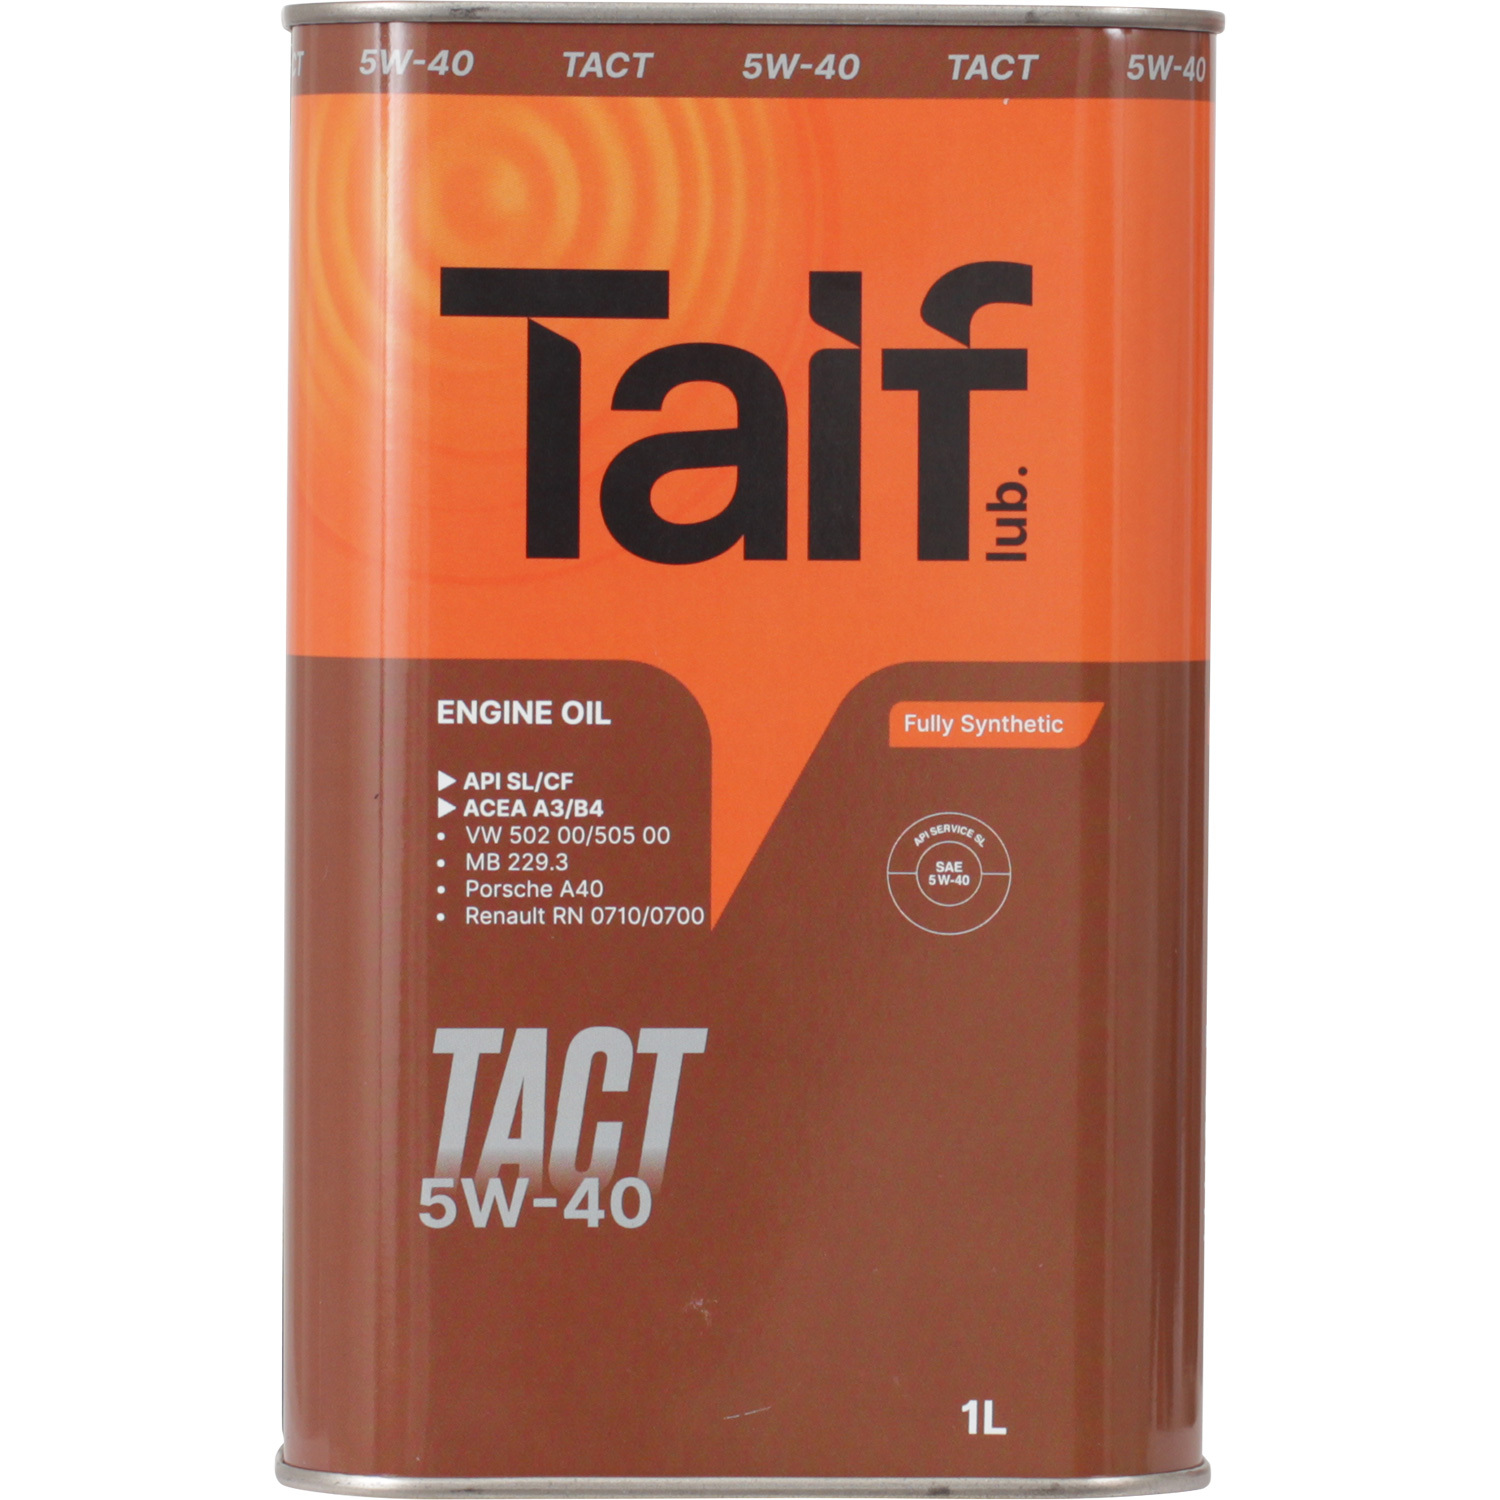 Taif Моторное масло Taif TACT 5W-40, 1 л масло моторное taif vivace 5w 40 4л